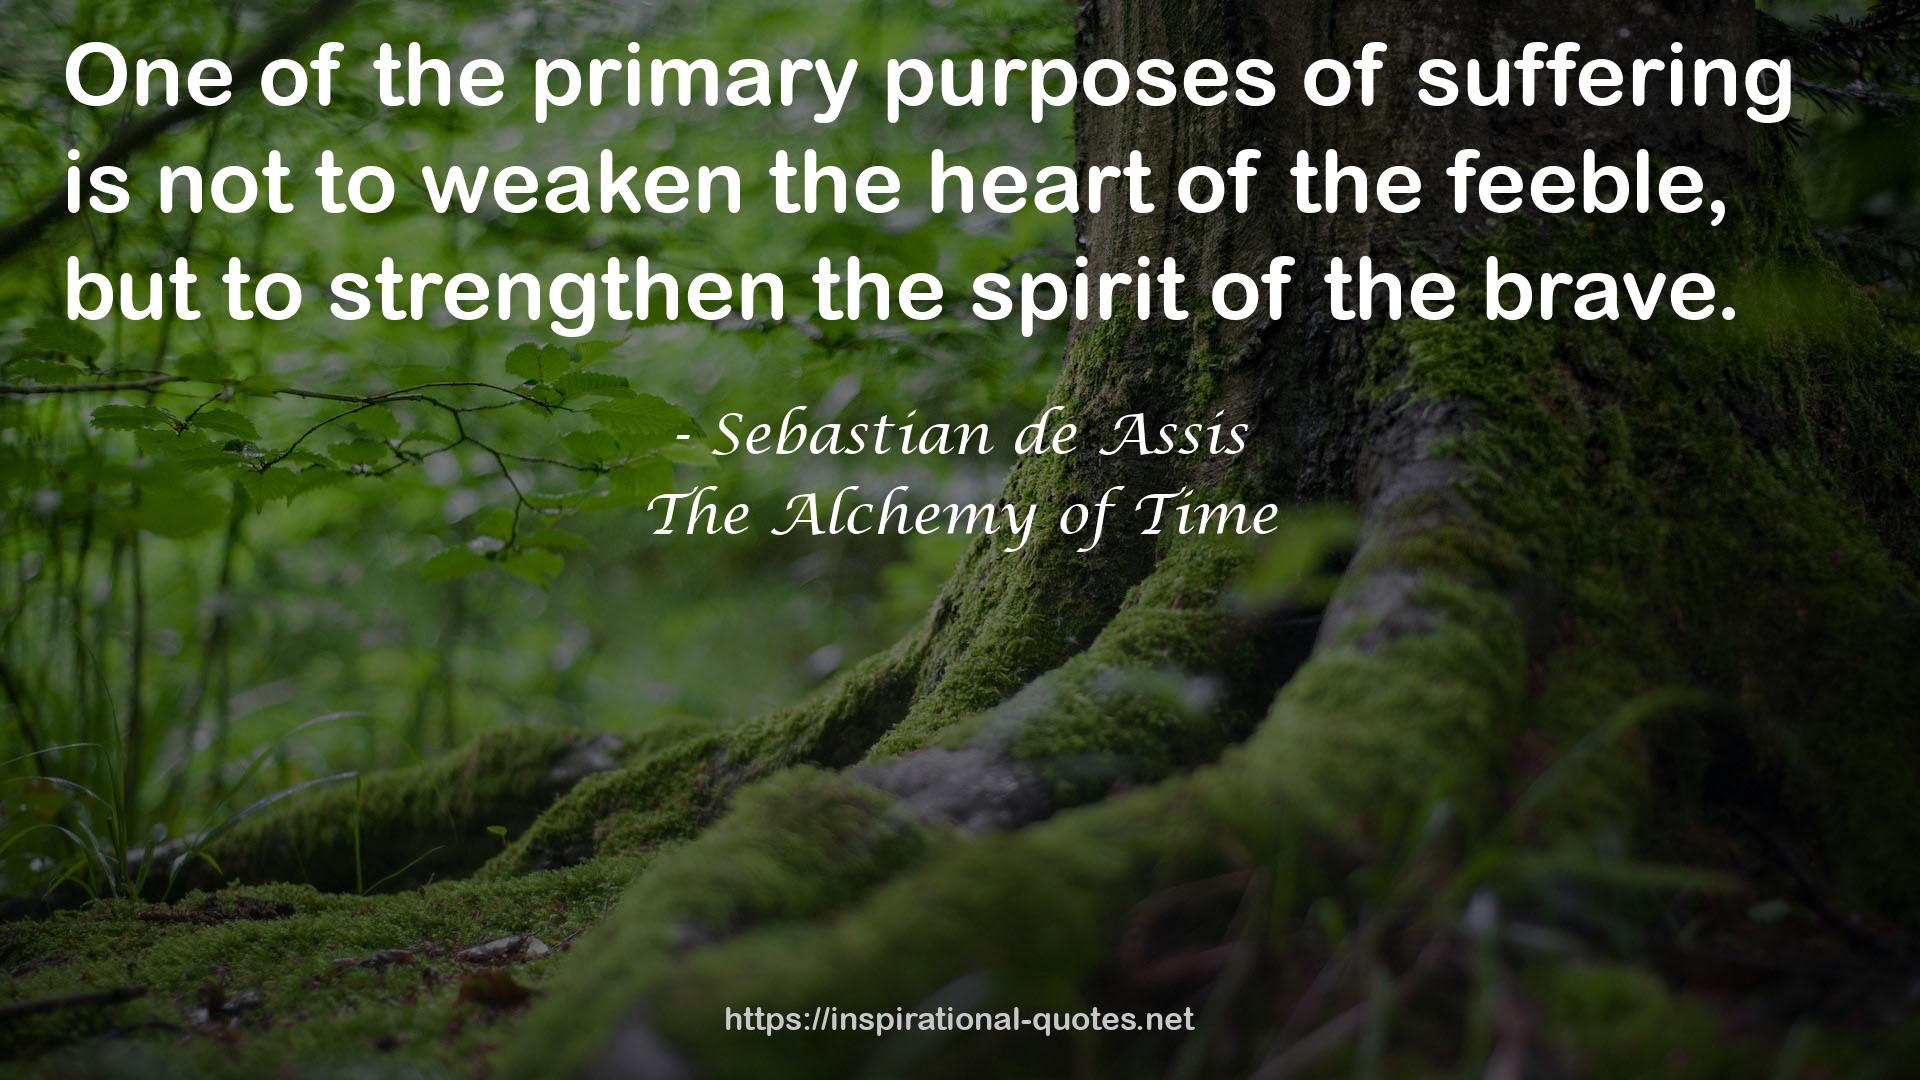 The Alchemy of Time QUOTES